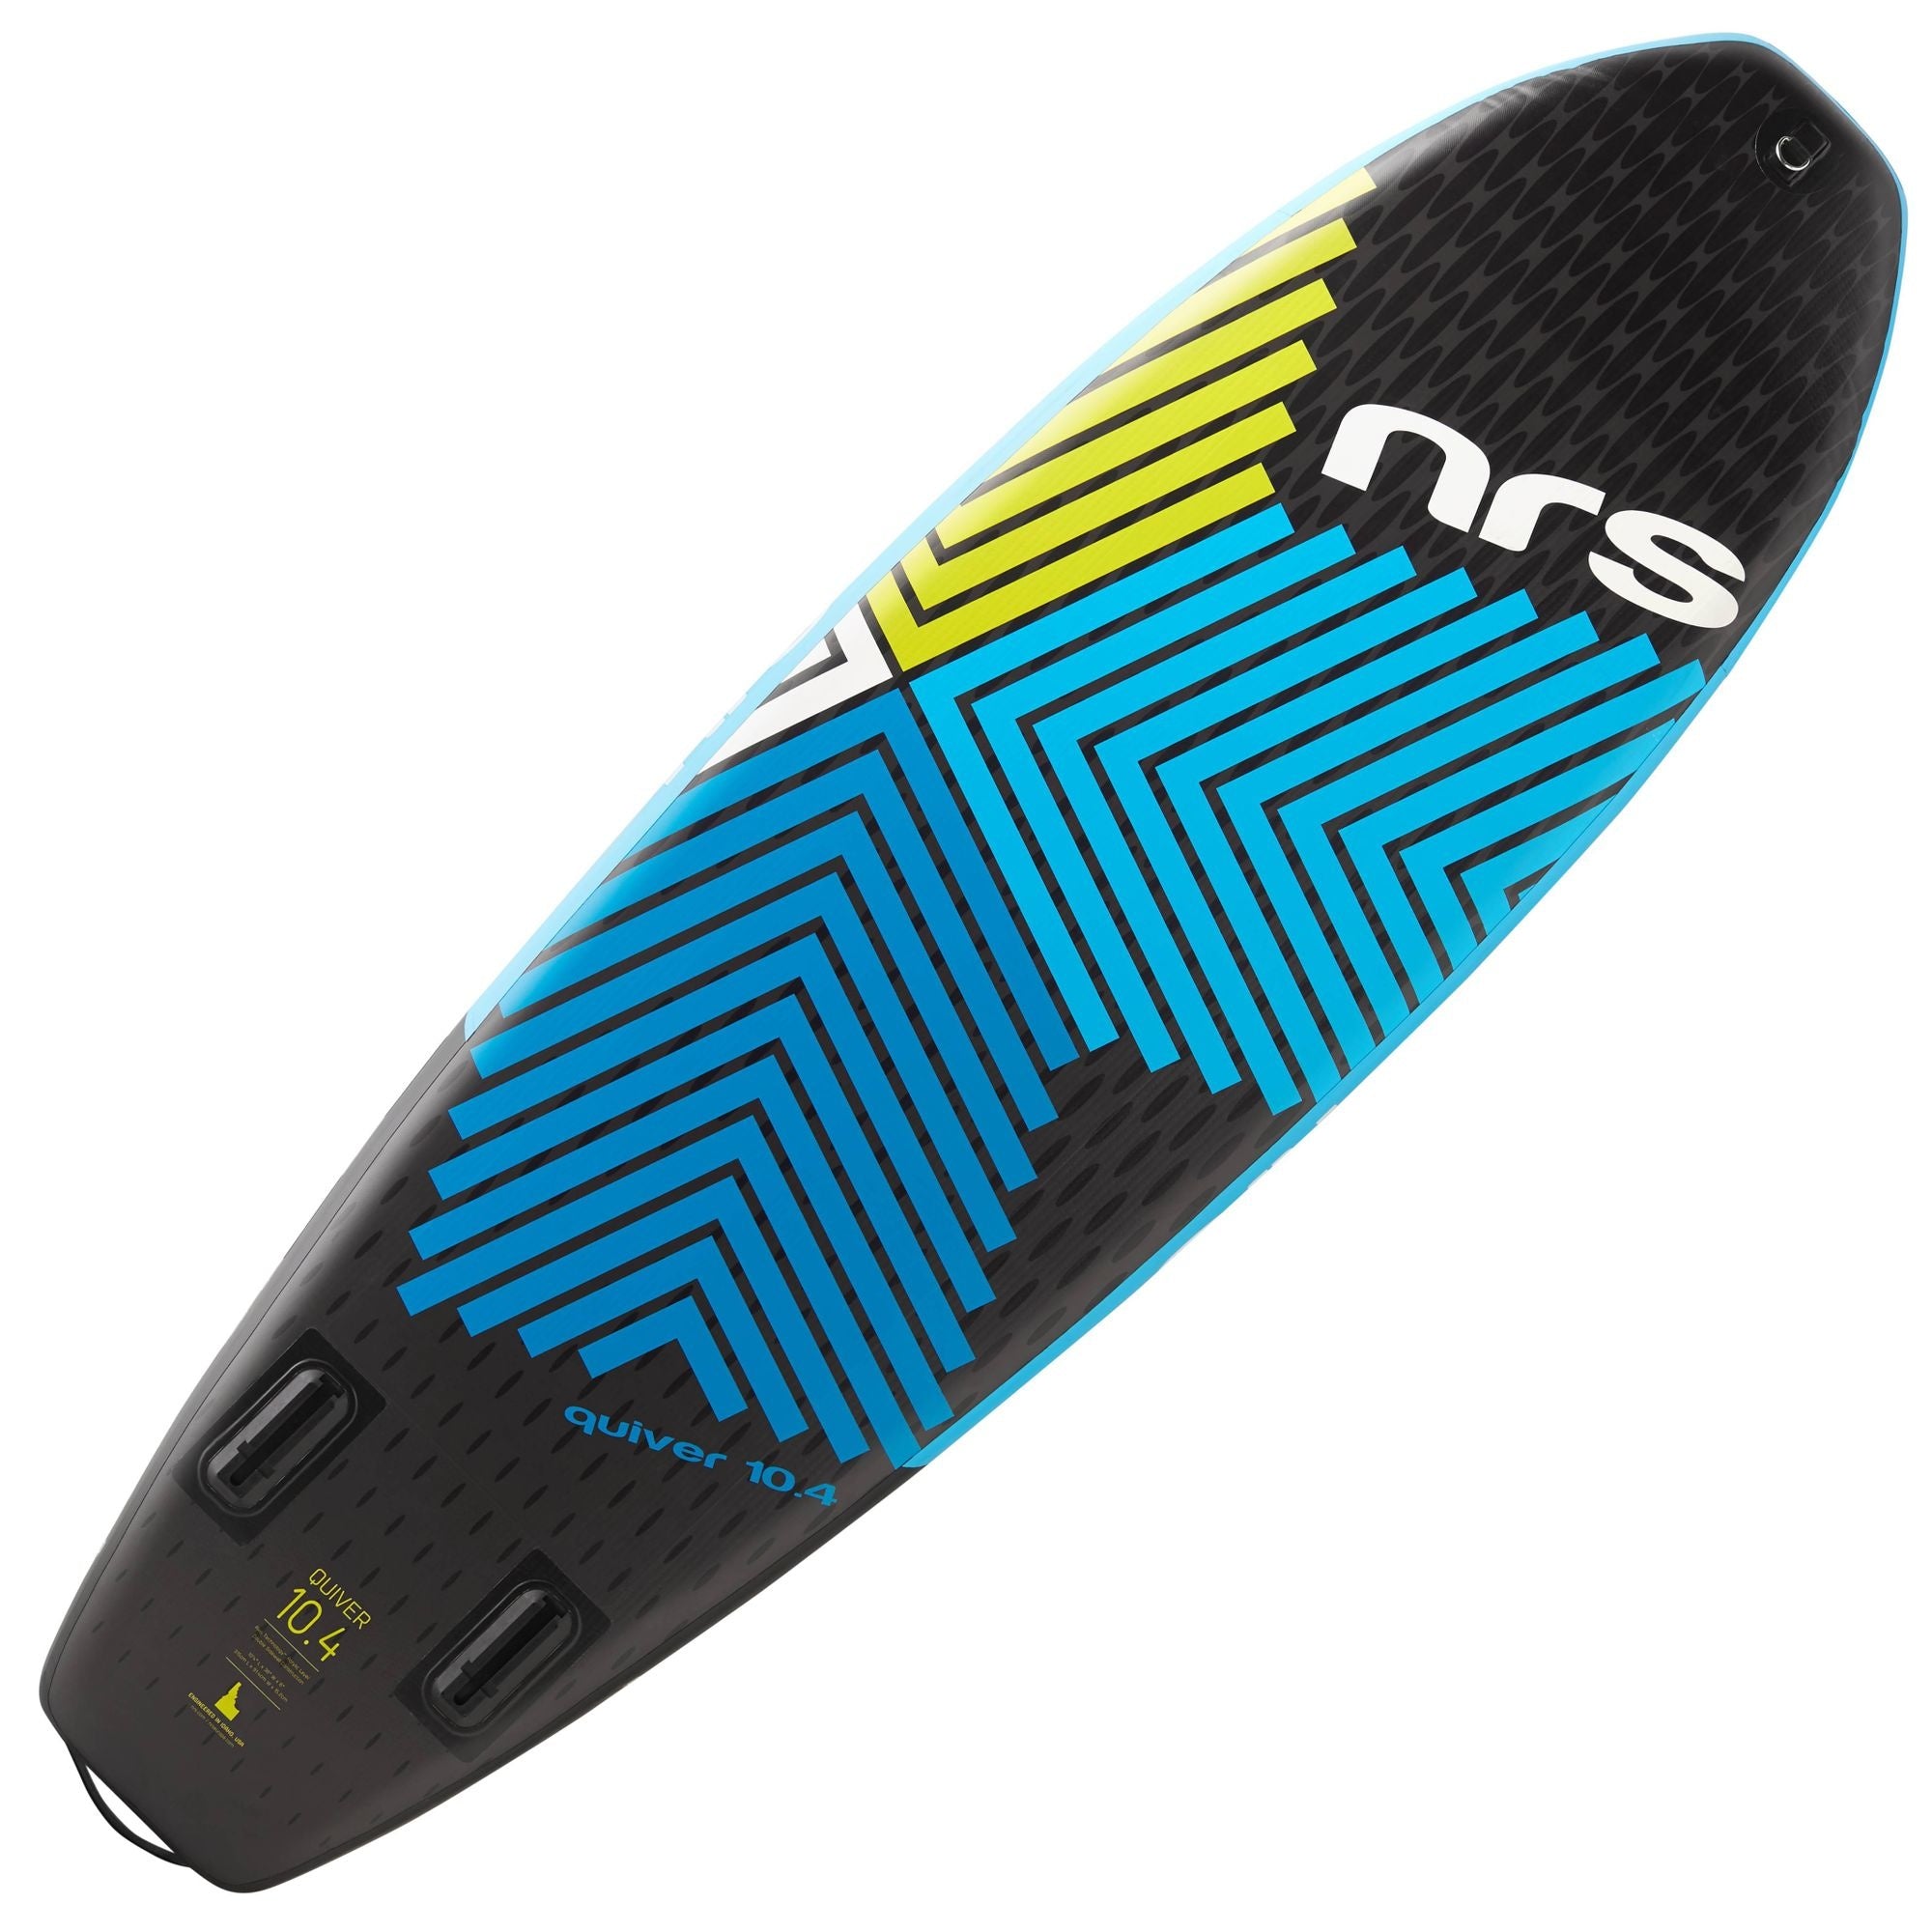 NRS - Quiver Inflatable SUP